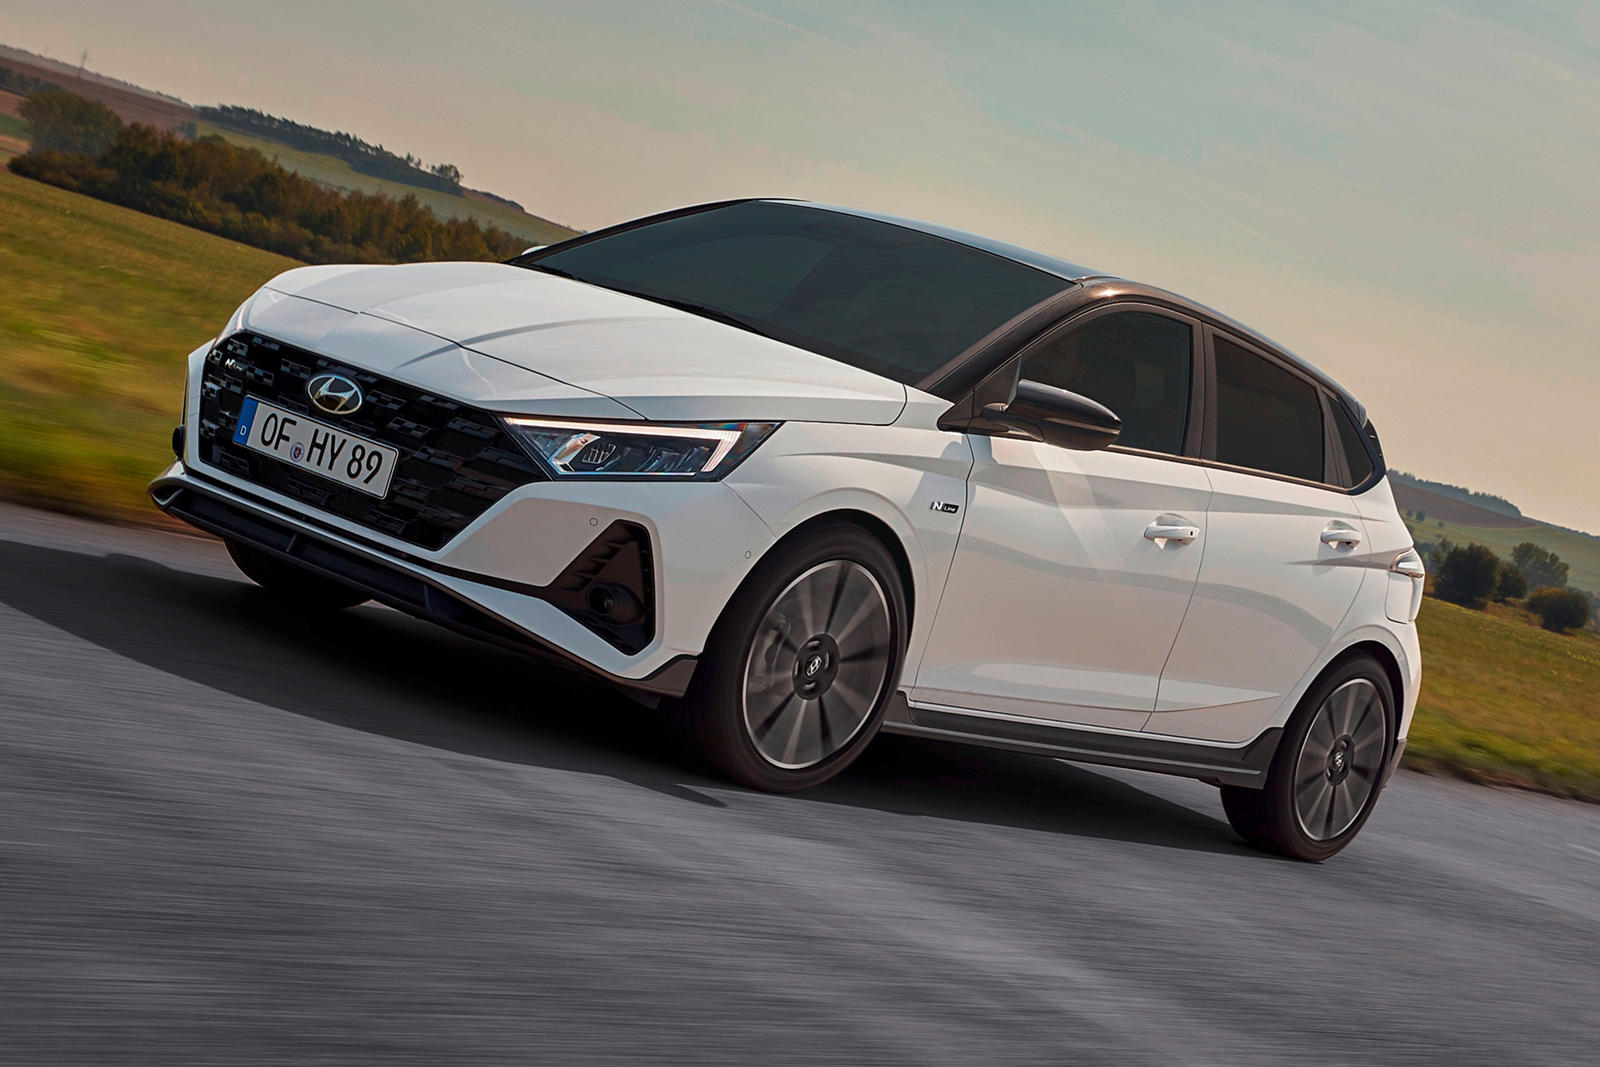 2021 Hyundai i20 N Line Is A Sporty Hatchback You Can't Have - CarBuzz